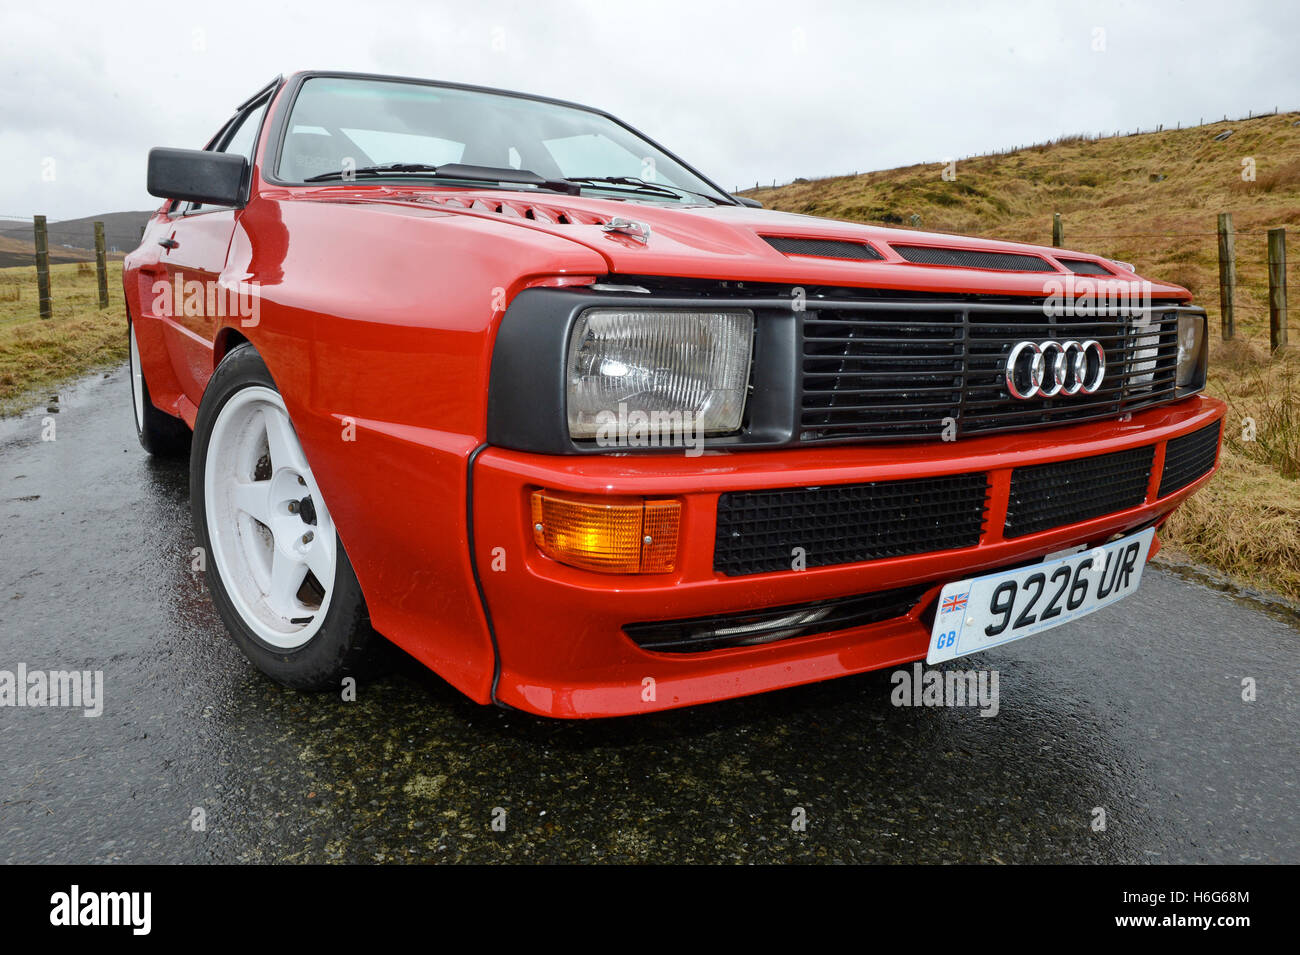 C300CWY Audi quattro Rhd historics, vintage motors and collectibles 2019;  Leighton Hall transport collection of cars & veteran vehicles of yesteryear  Stock Photo - Alamy